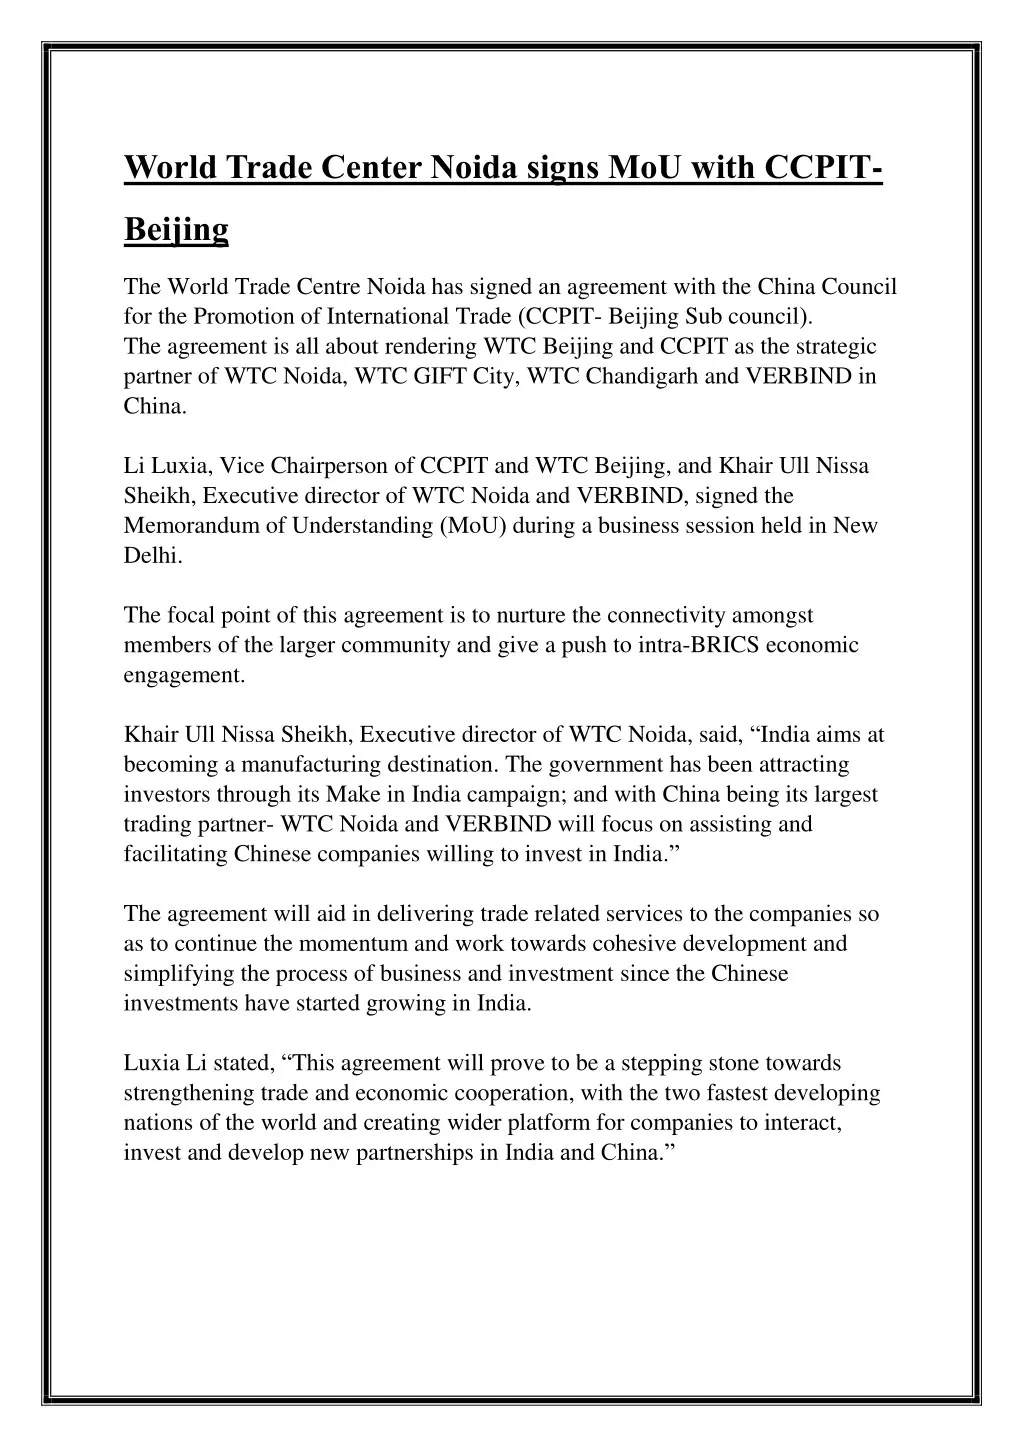 world trade center noida signs mou with ccpit